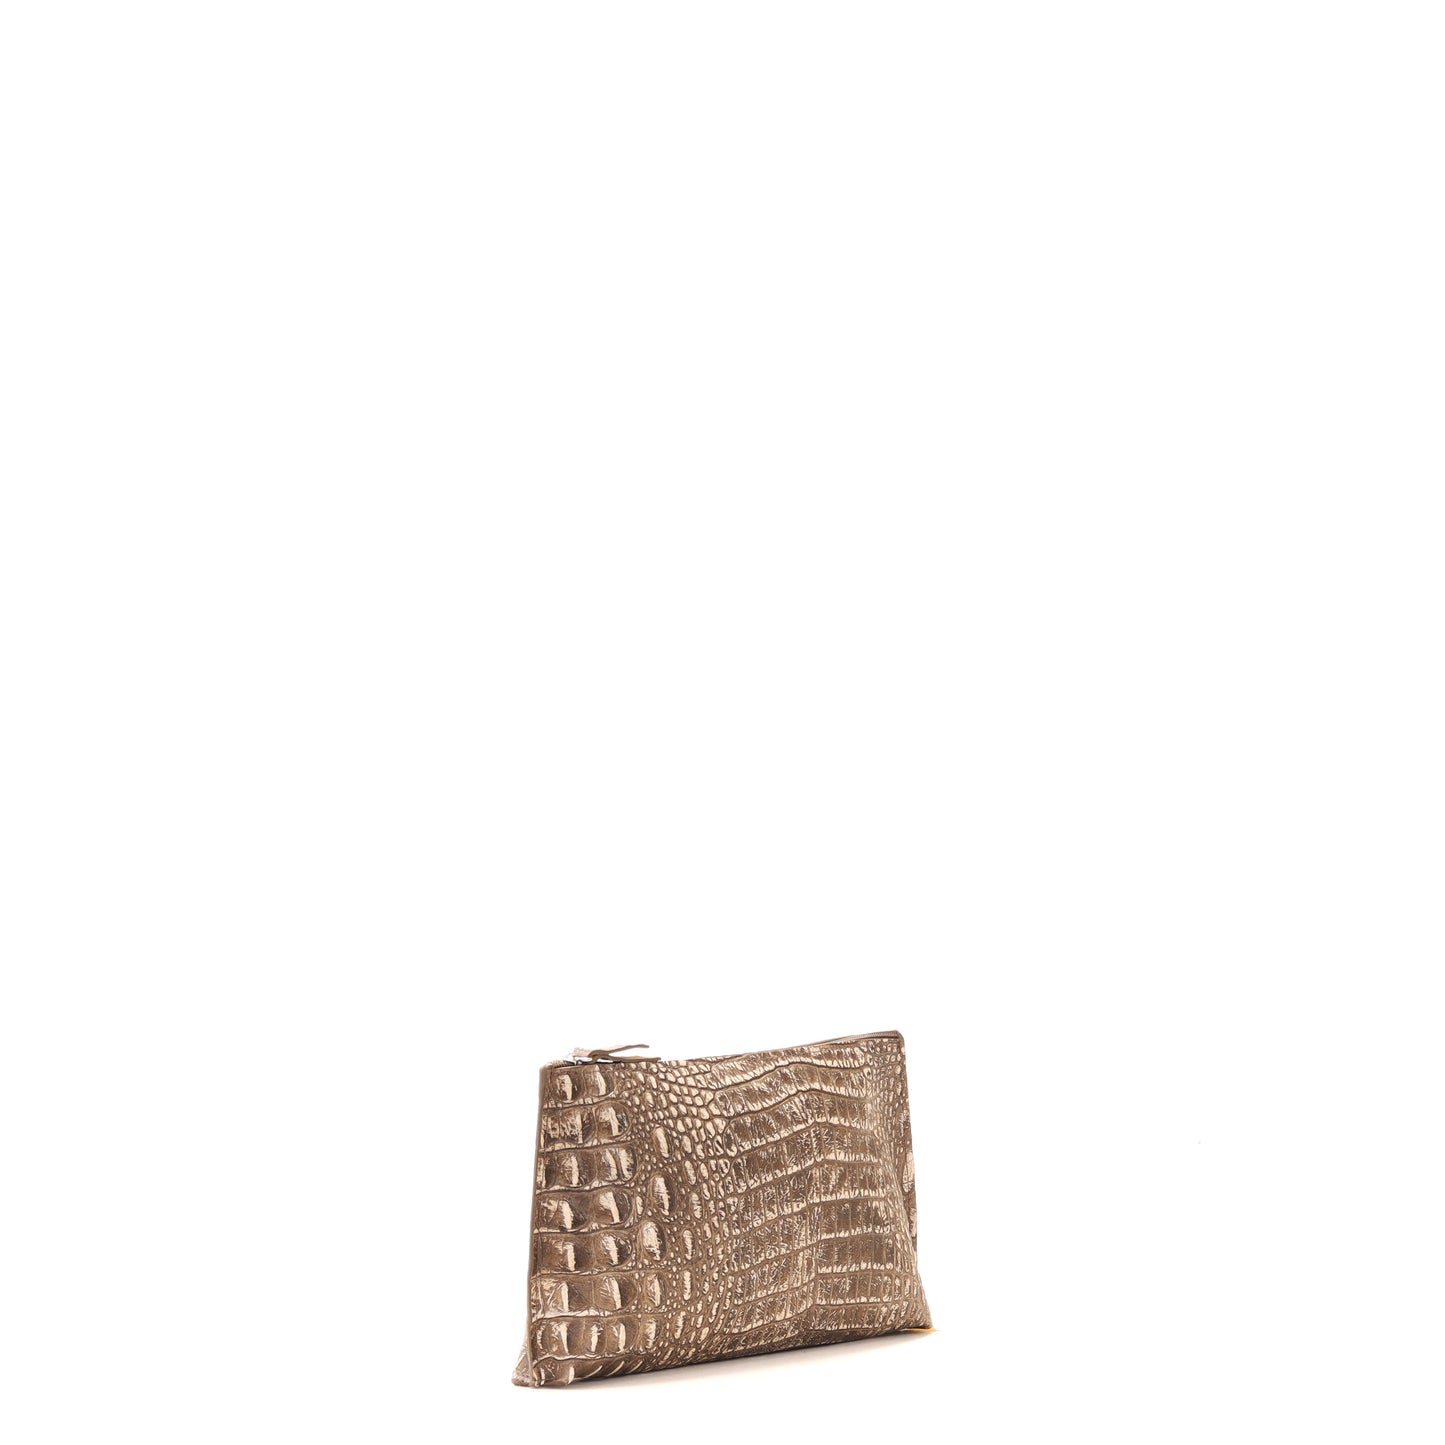 ESSENTIAL POUCH RUSTIC BROWN EMBOSSED CROC